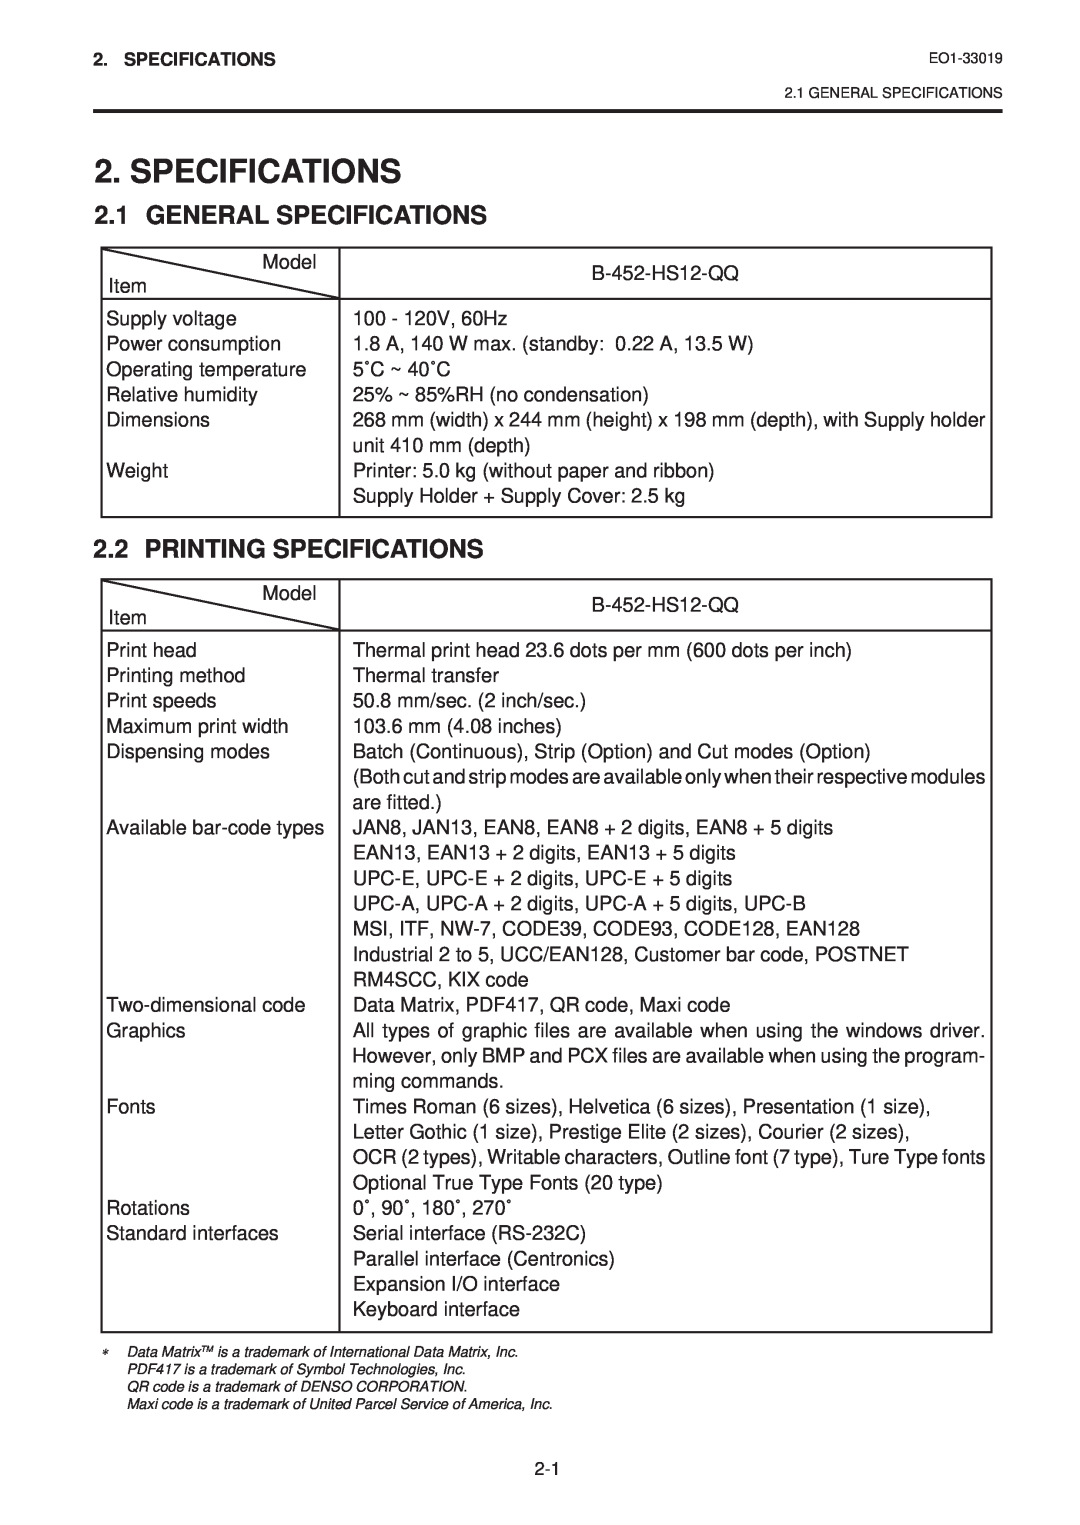 Toshiba B-450-HS-QQ owner manual General Specifications, Printing Specifications 